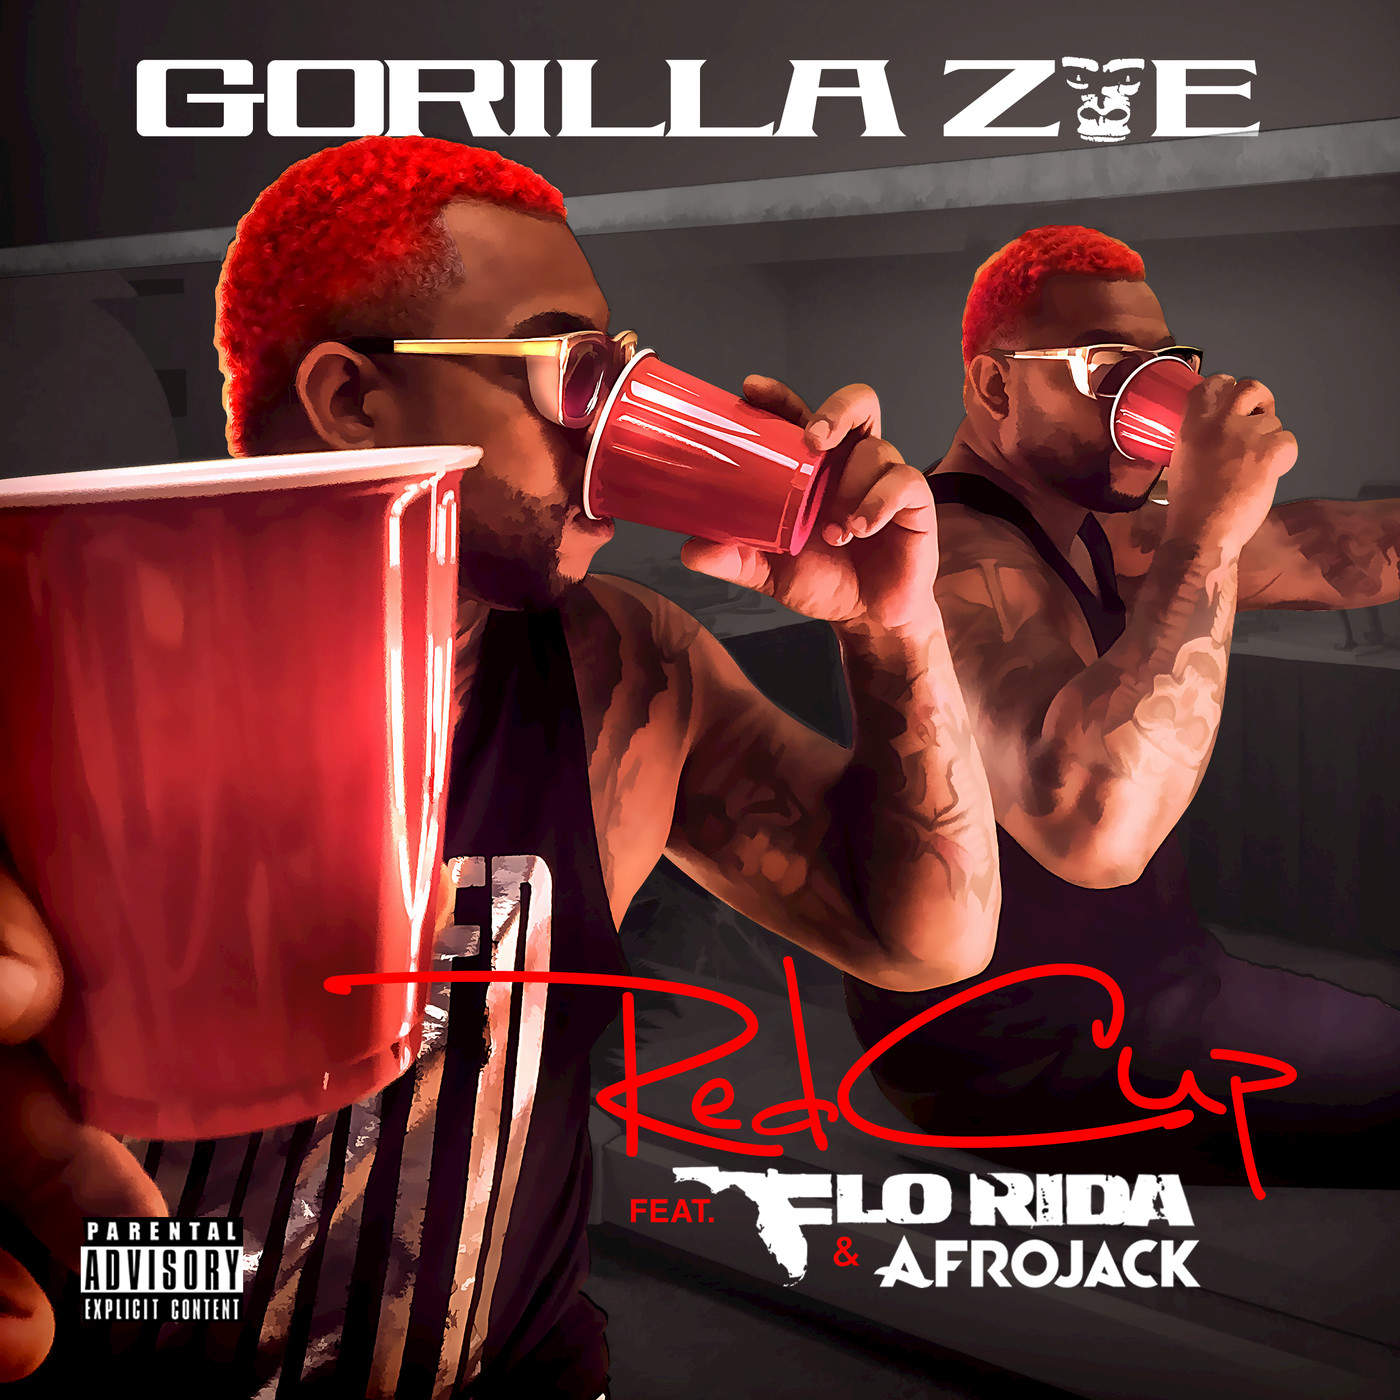 Gorilla Zoe Releases Visual for “Red Cup” Featuring Flo Rida!